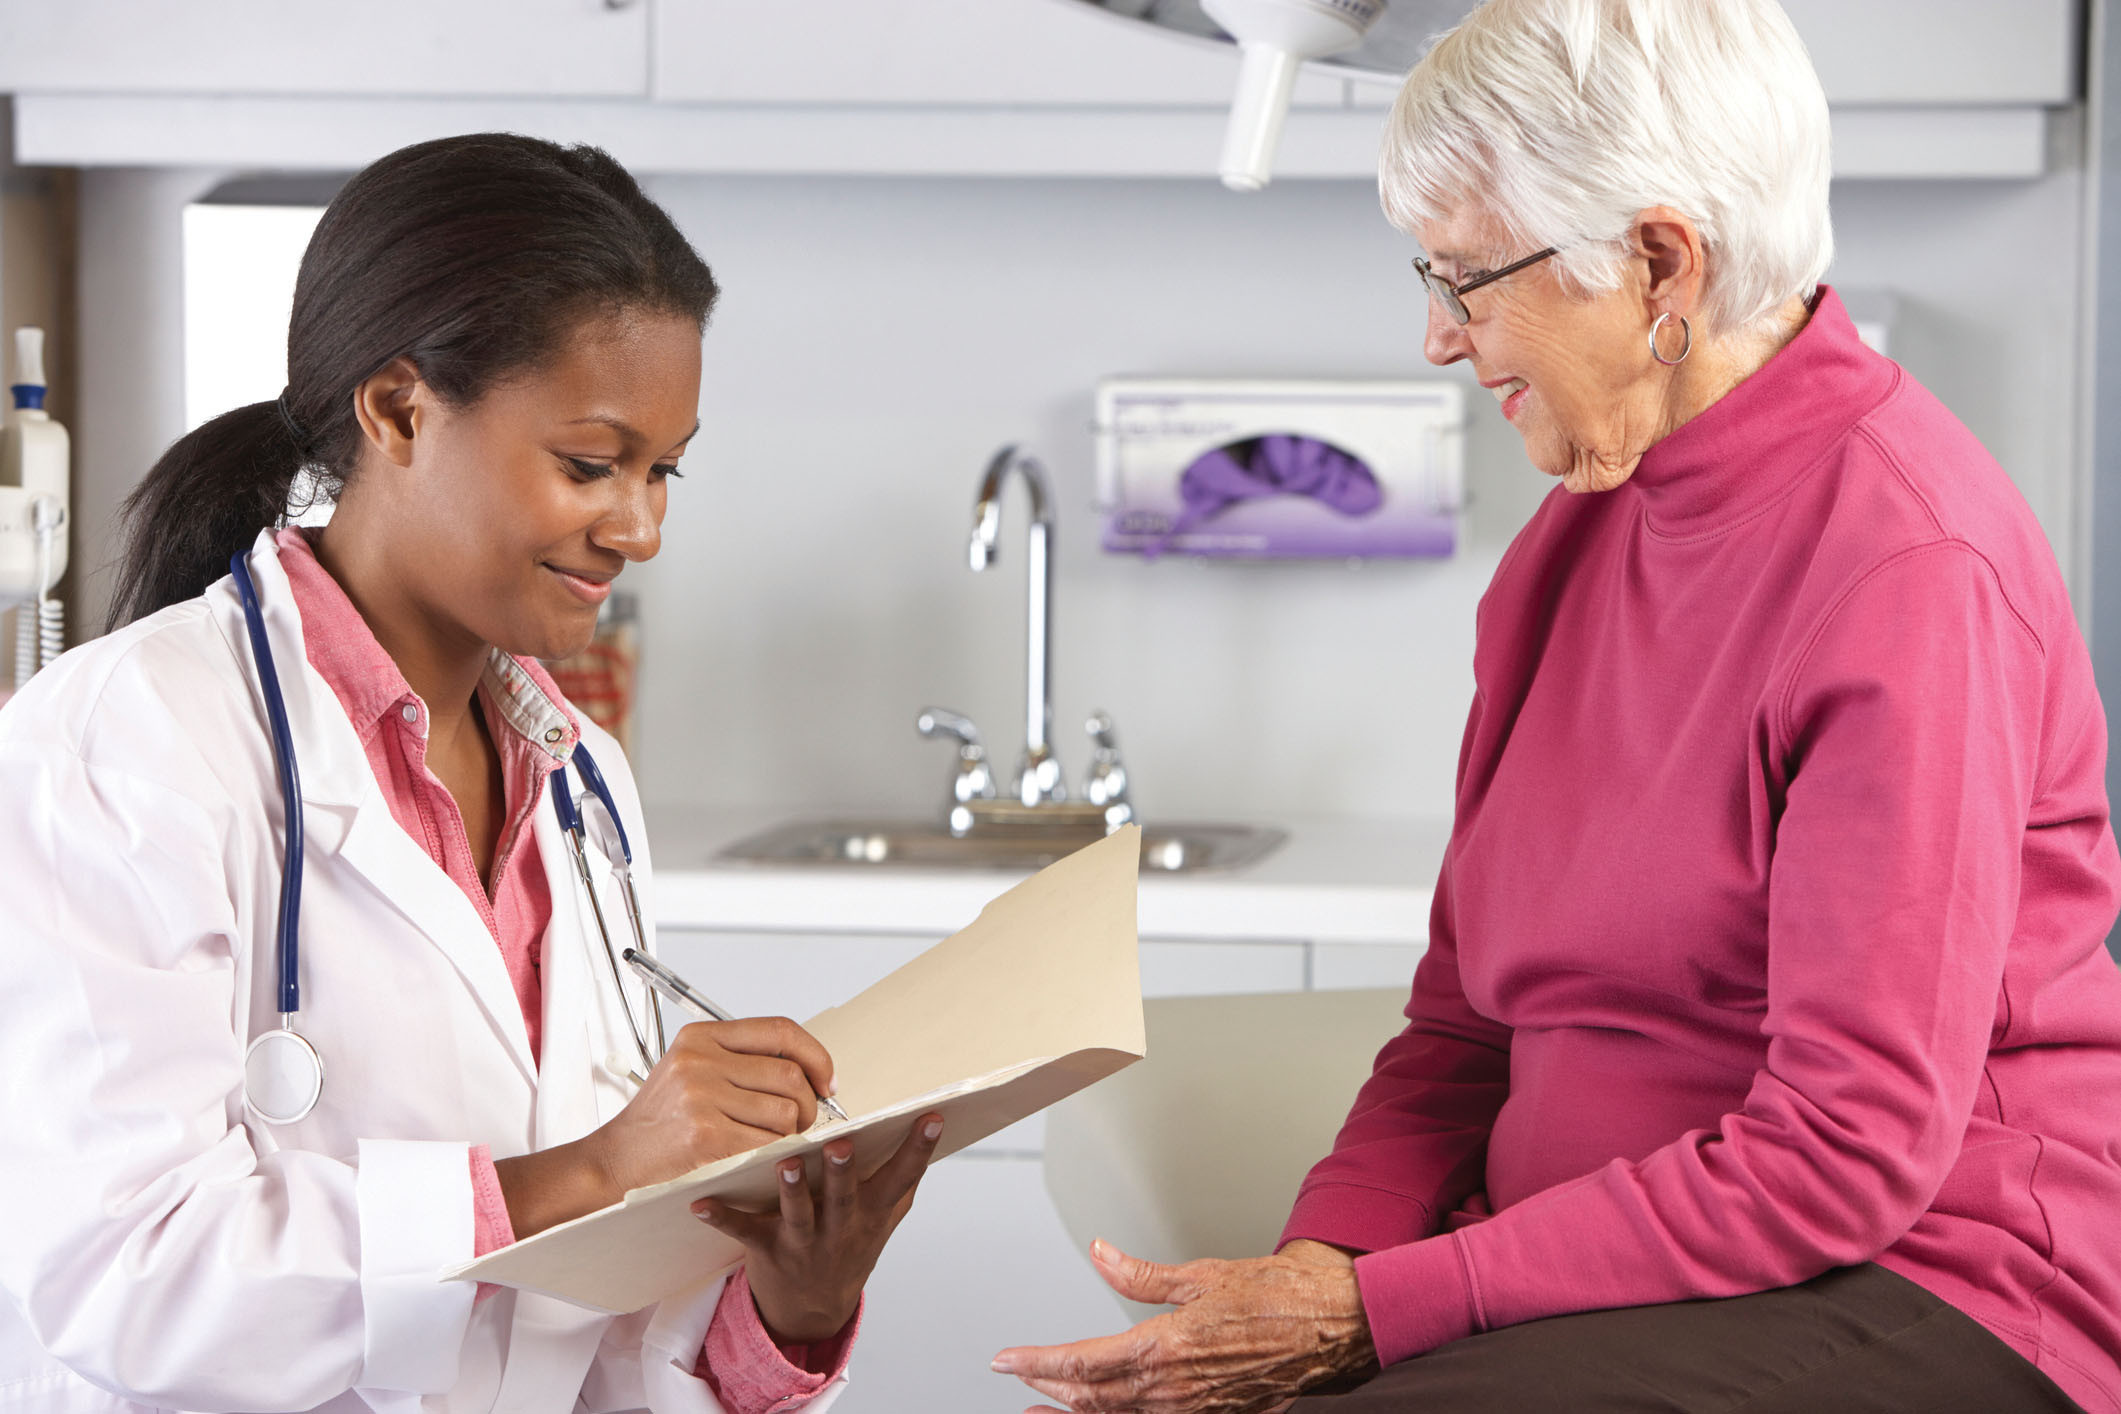 photo of a medical professional talking with a senior woman in an exam room; she is holding a folder and writing on paper in it